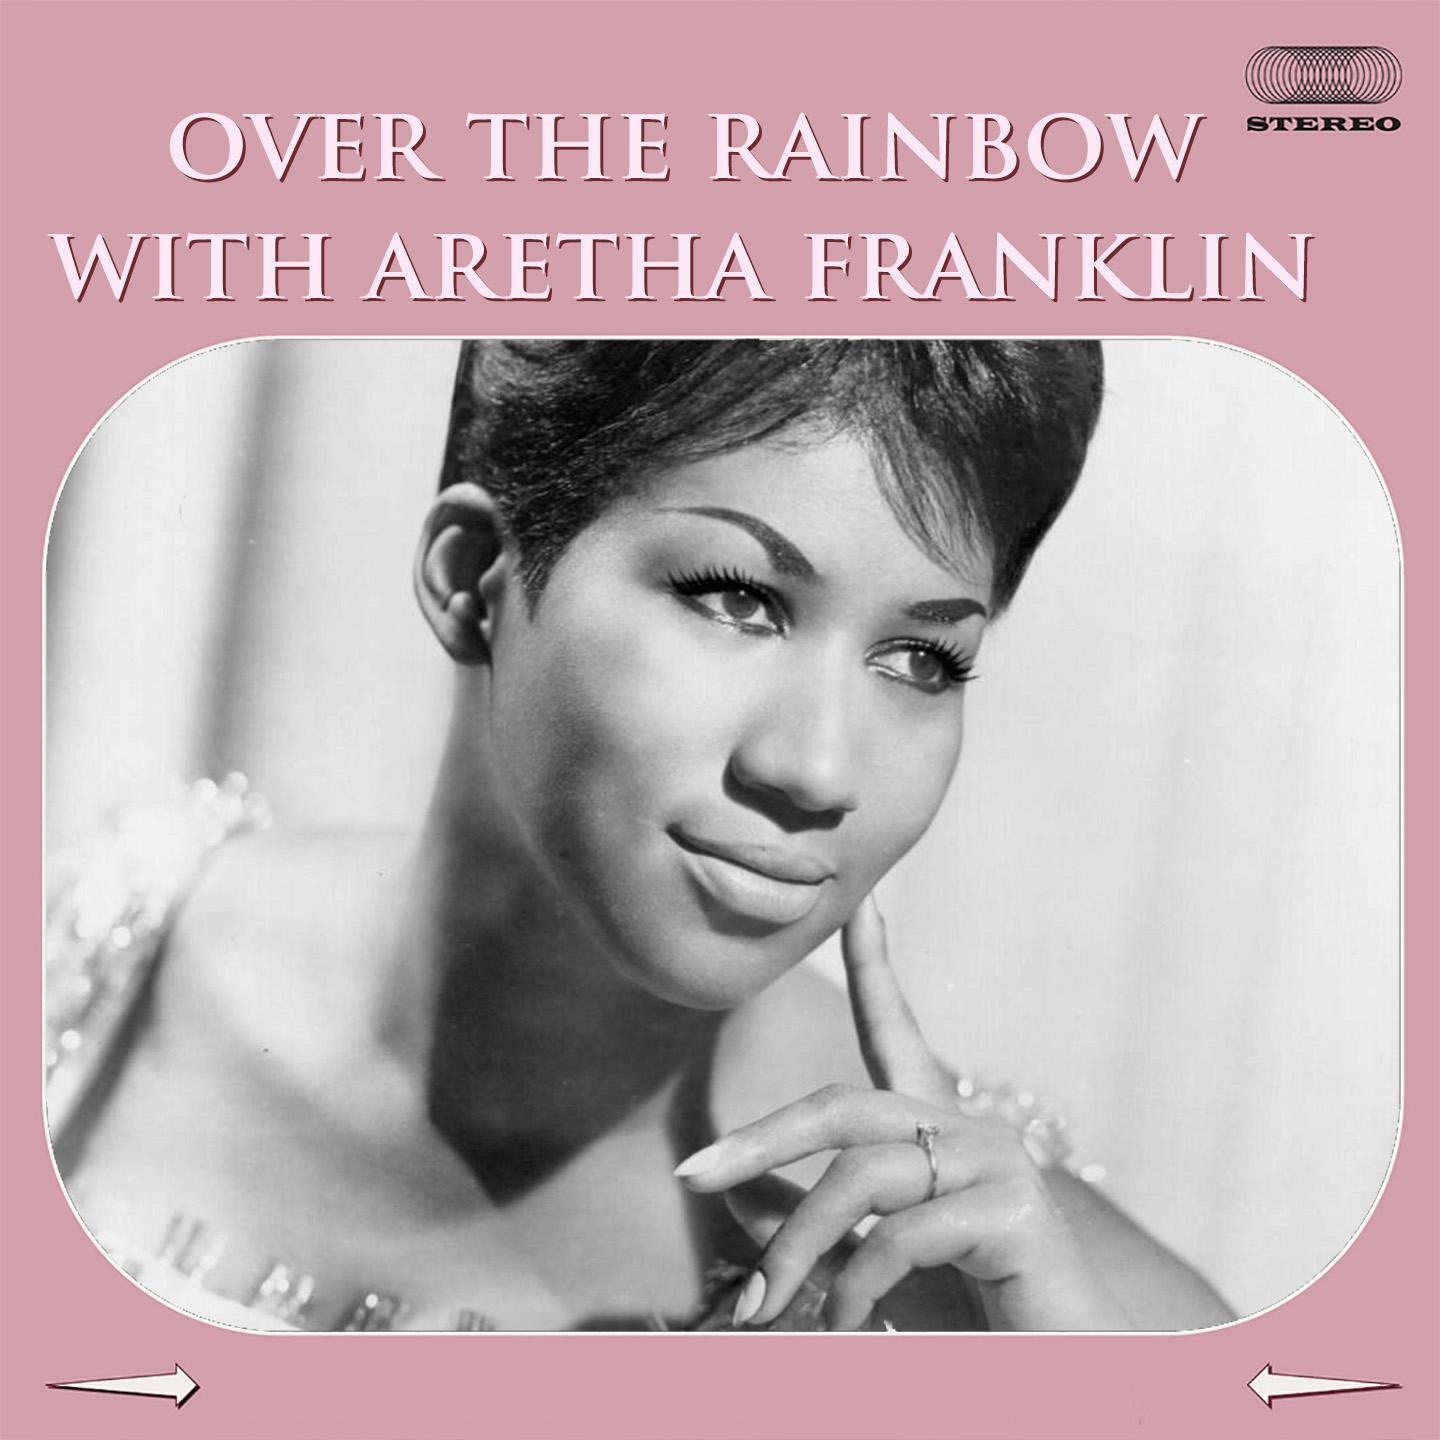 Over the Rainbow with Arethe Franklin